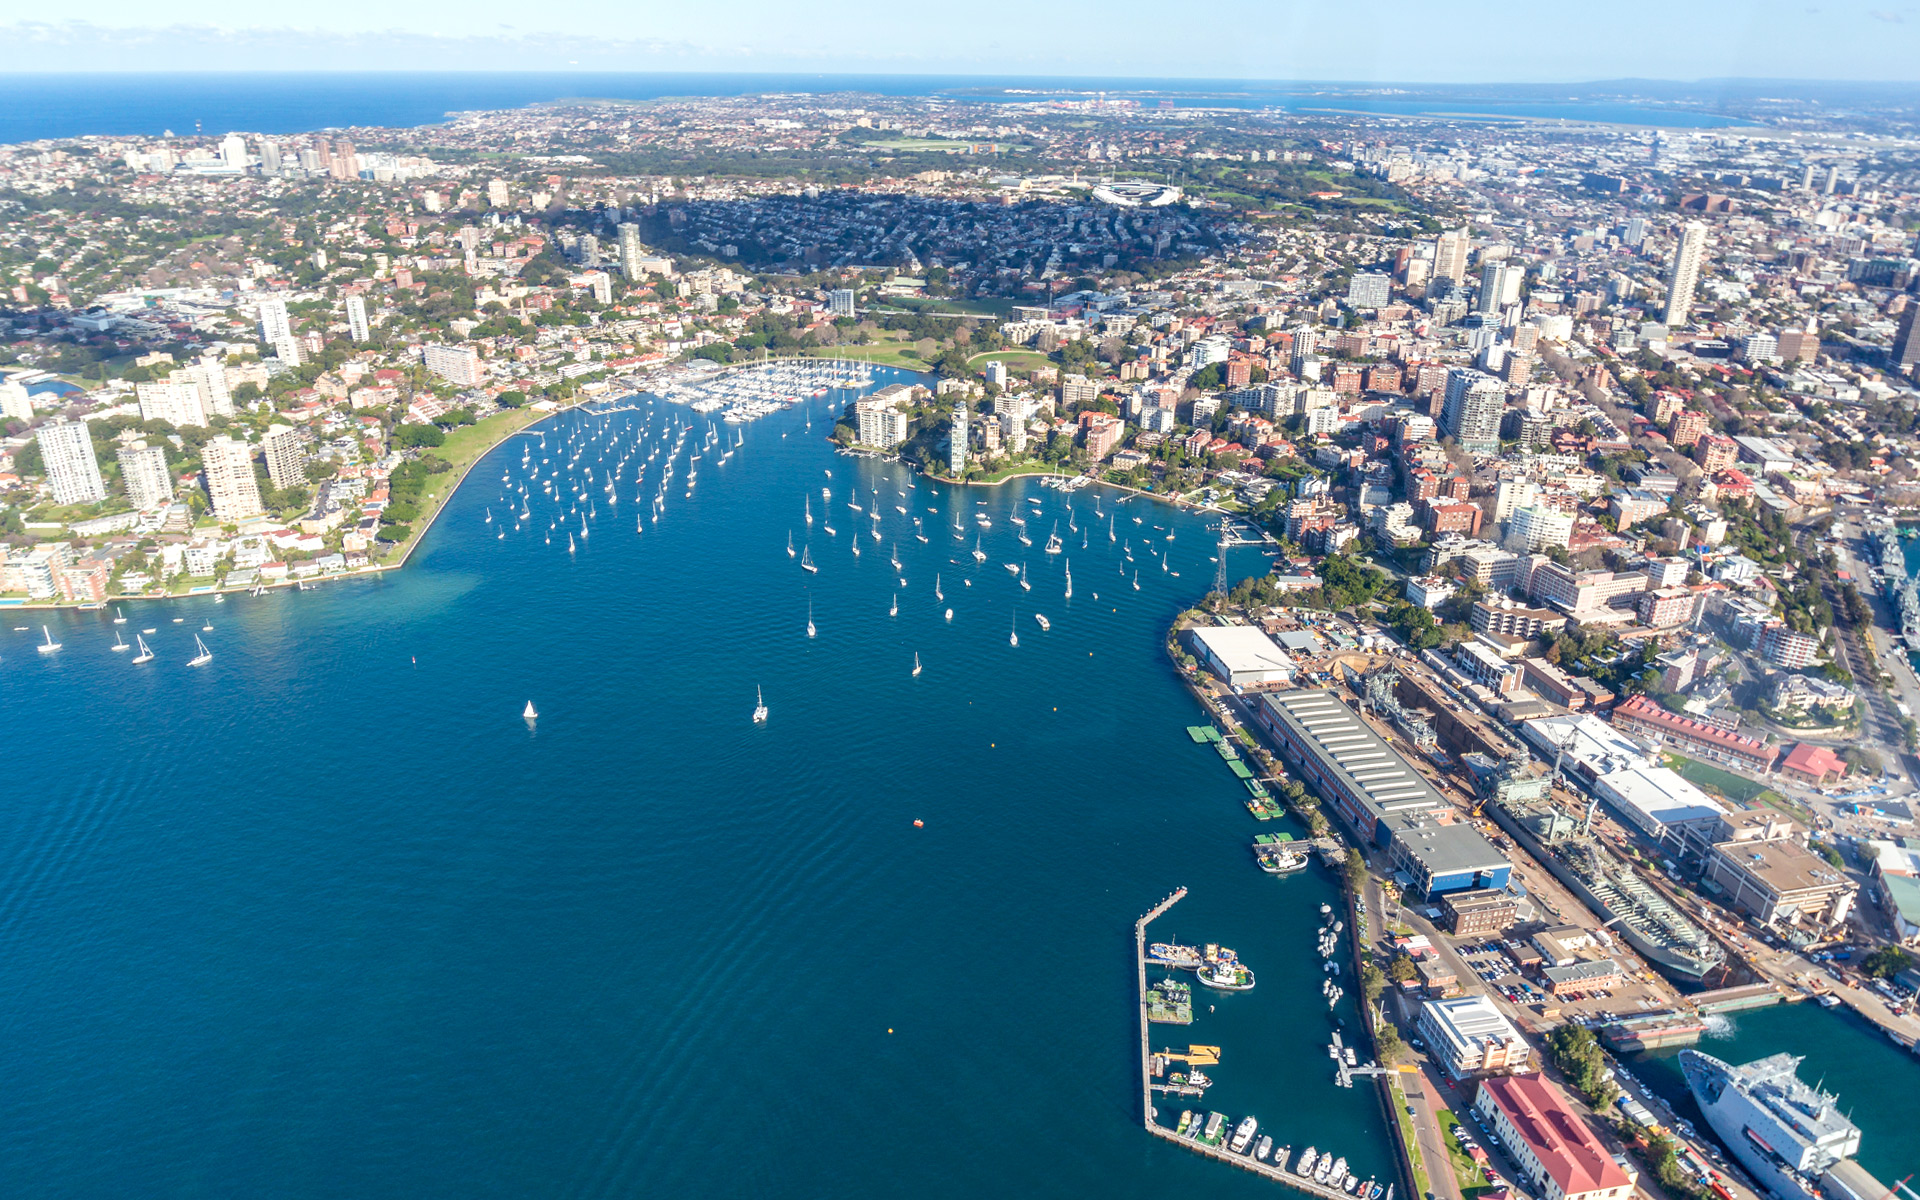 Aerial photo of Bay area of Sydney